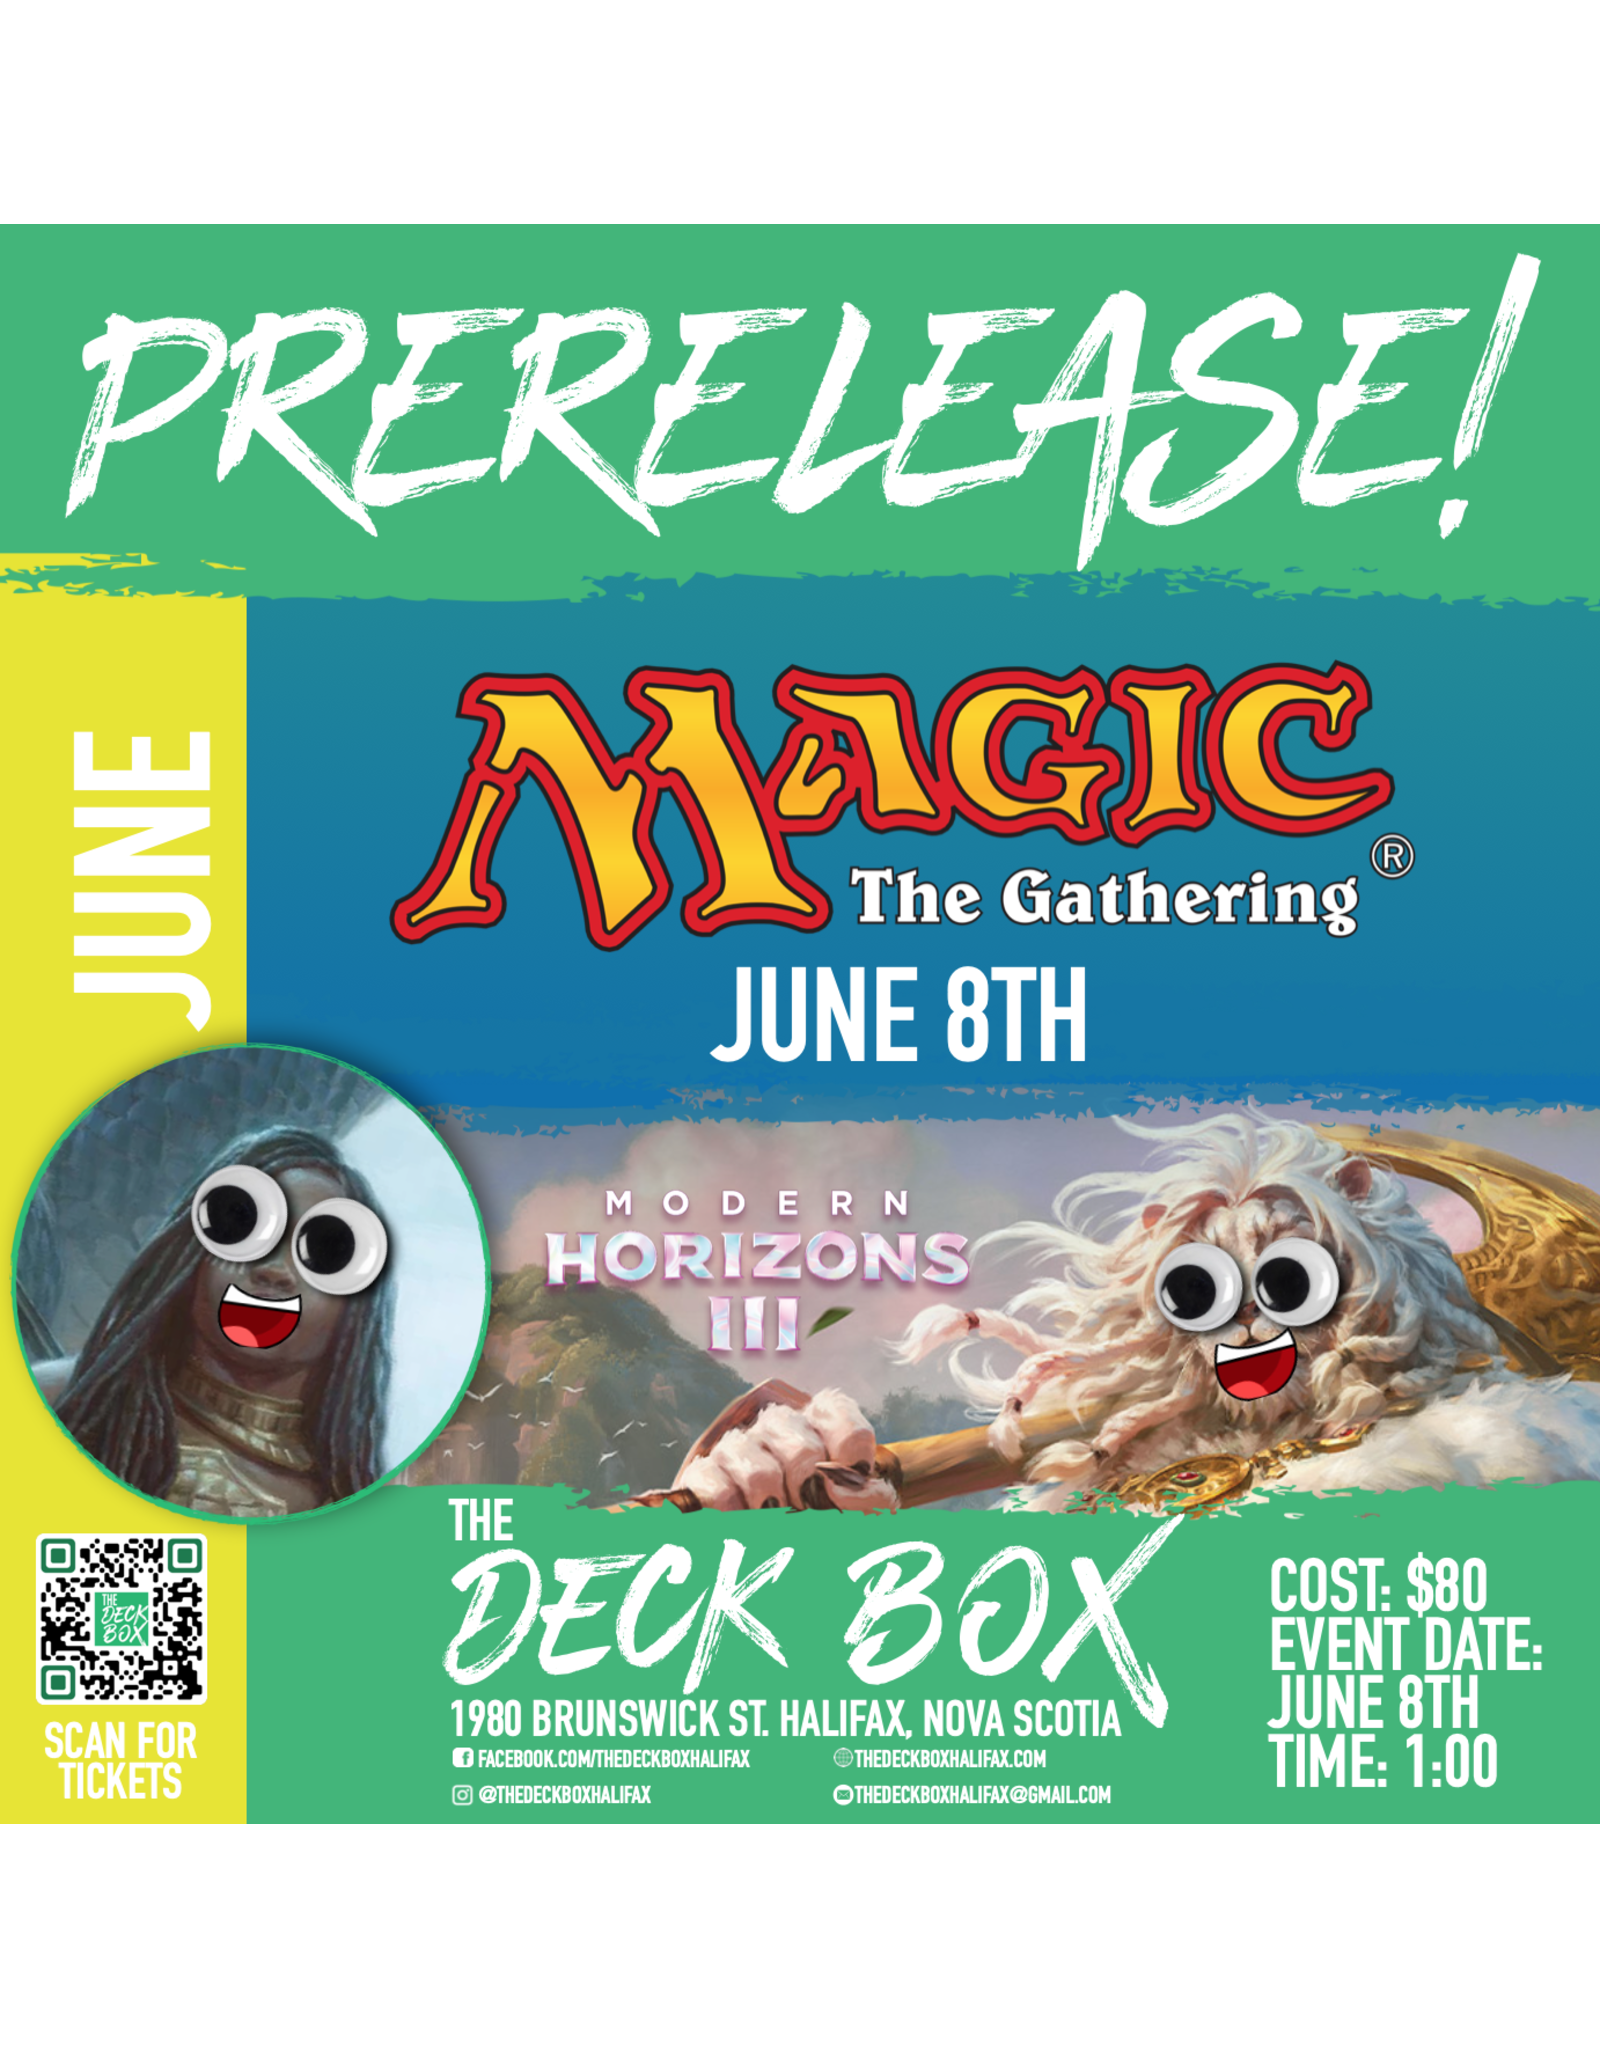 Events (Saturday June 8th @ 1:00) Modern Horizons 3 Magic the Gathering Prerelease!